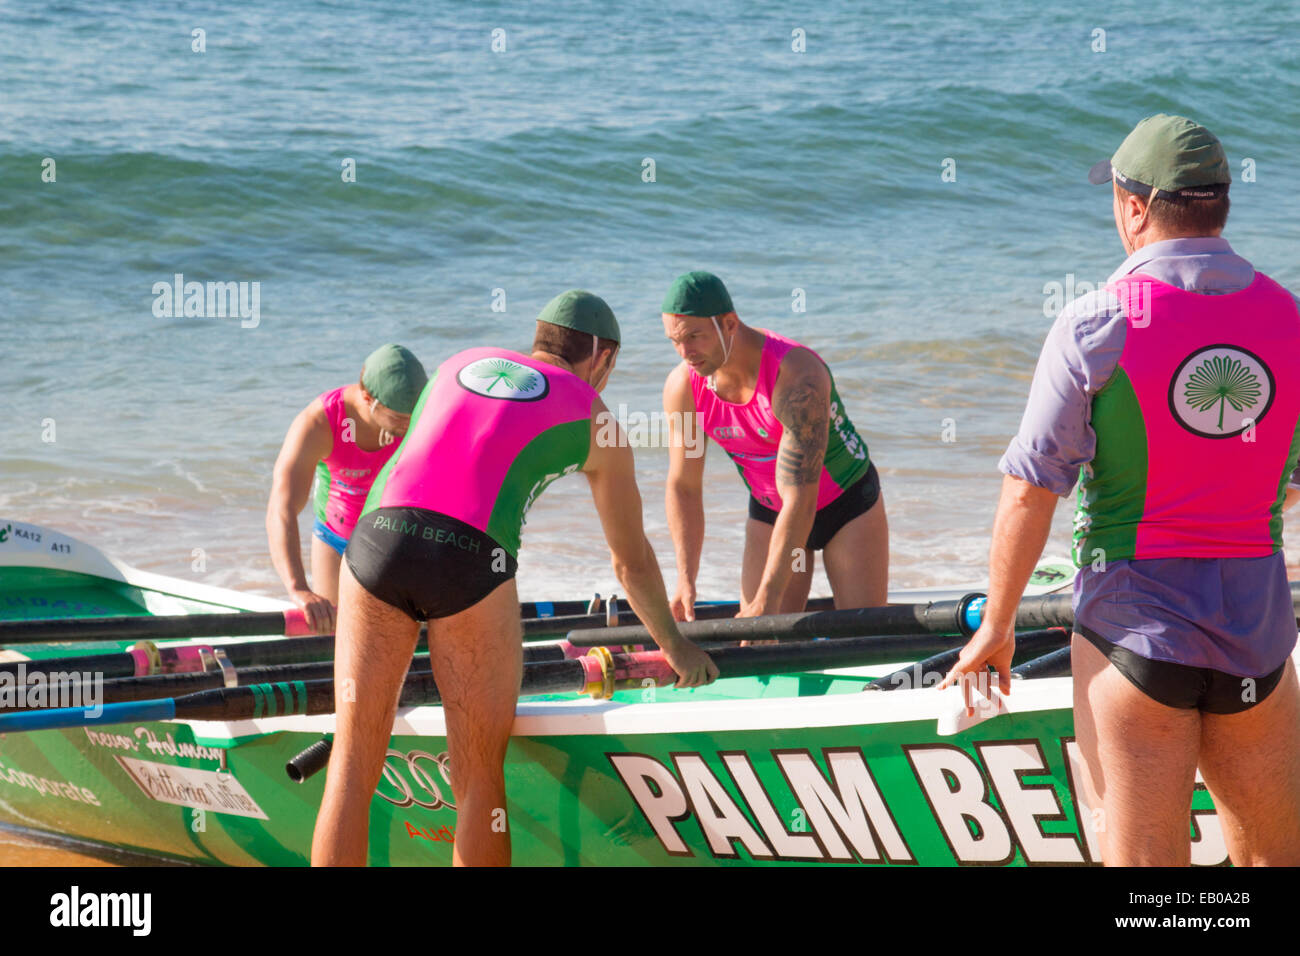 Summer surfboat racing competition amongst surfclubs located on Sydney's northern beaches begins at Bilgola Beach. Stock Photo